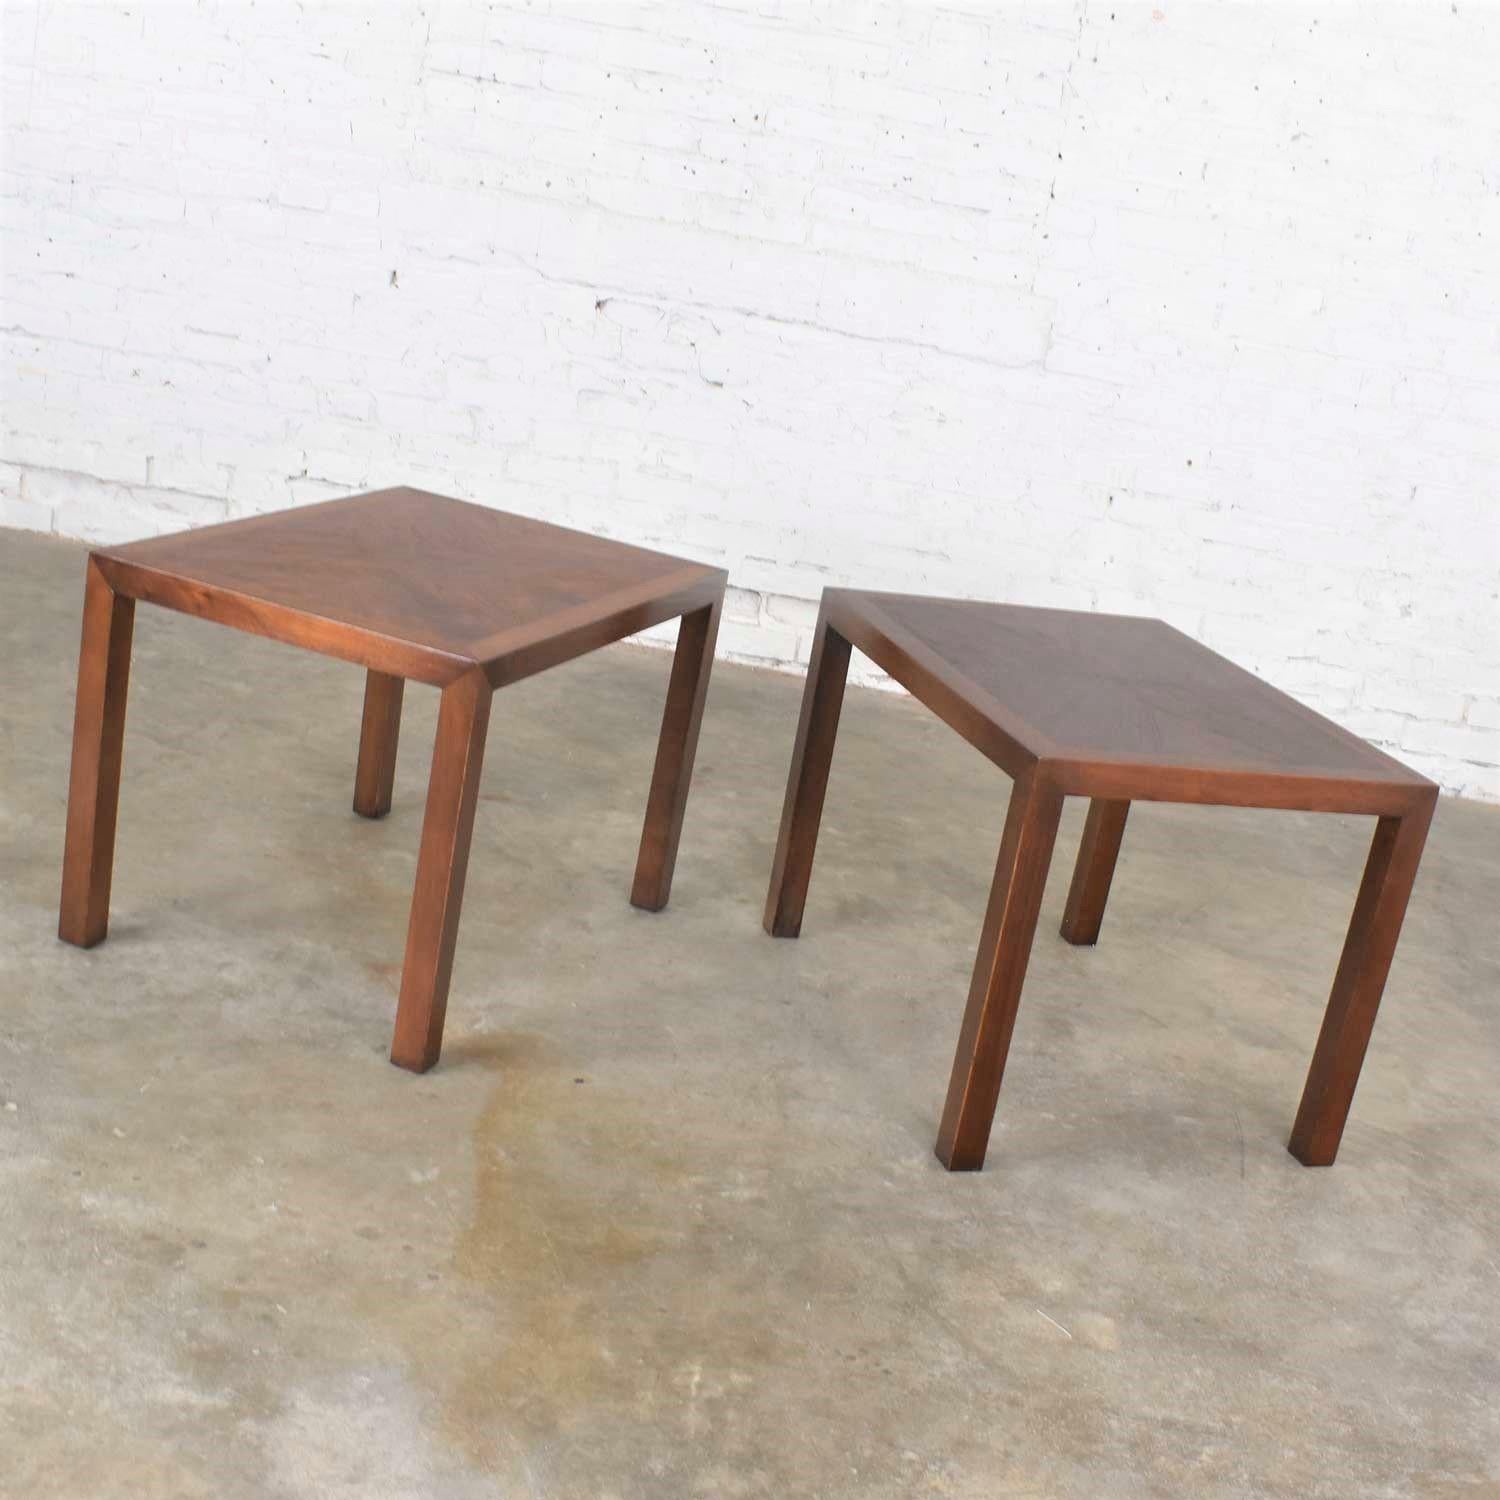 Inlay Vintage Modern Lane Parsons Style #1124-5 Walnut End or Side Tables, 1970, Pair